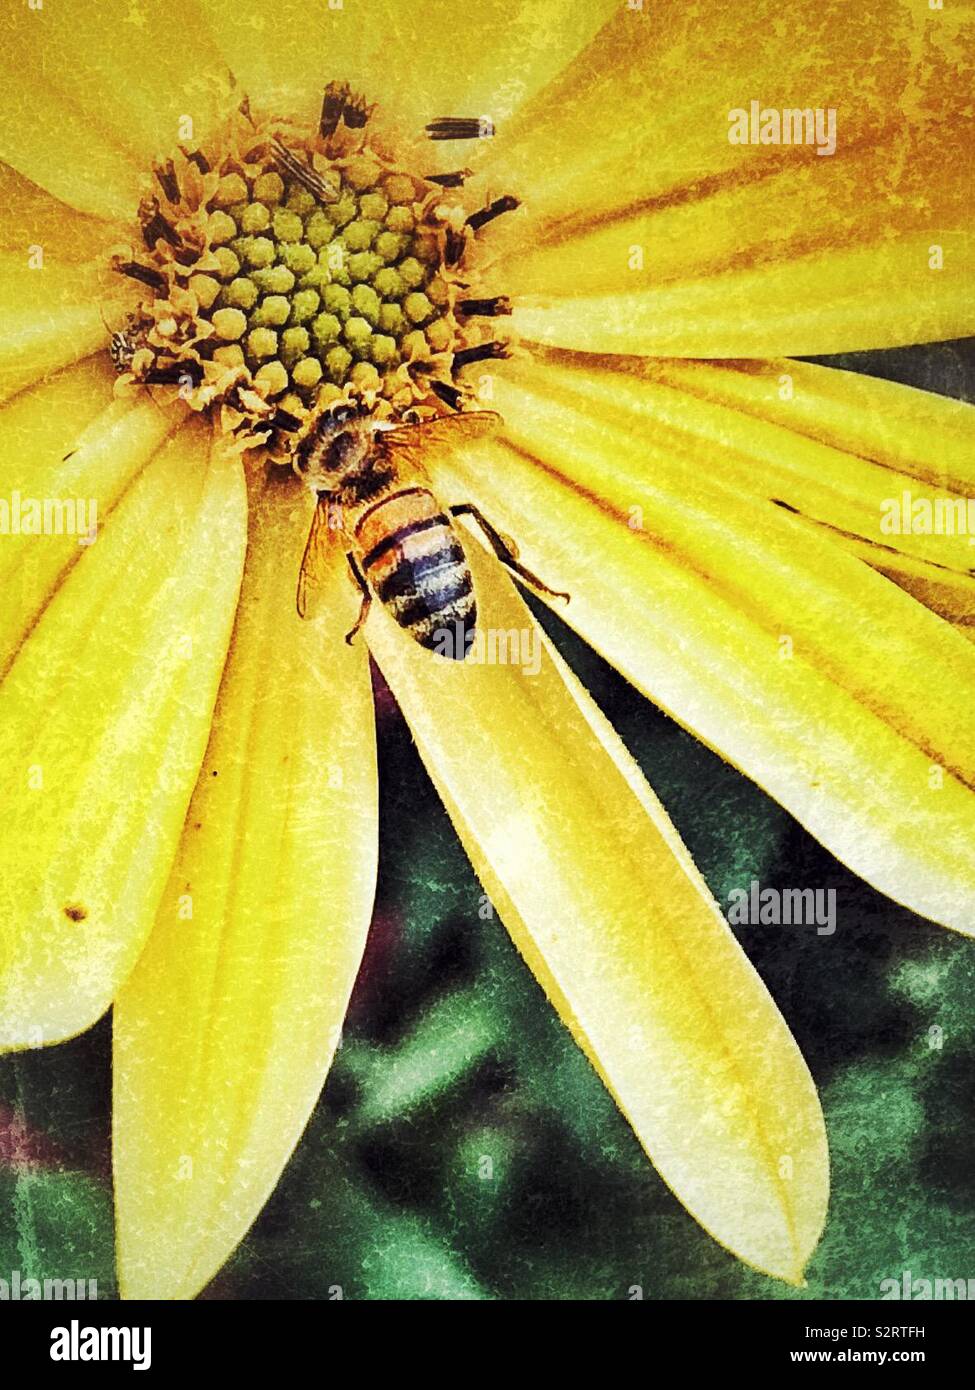 A bee on a sawtooth sunflower with a grunge effect. Stock Photo